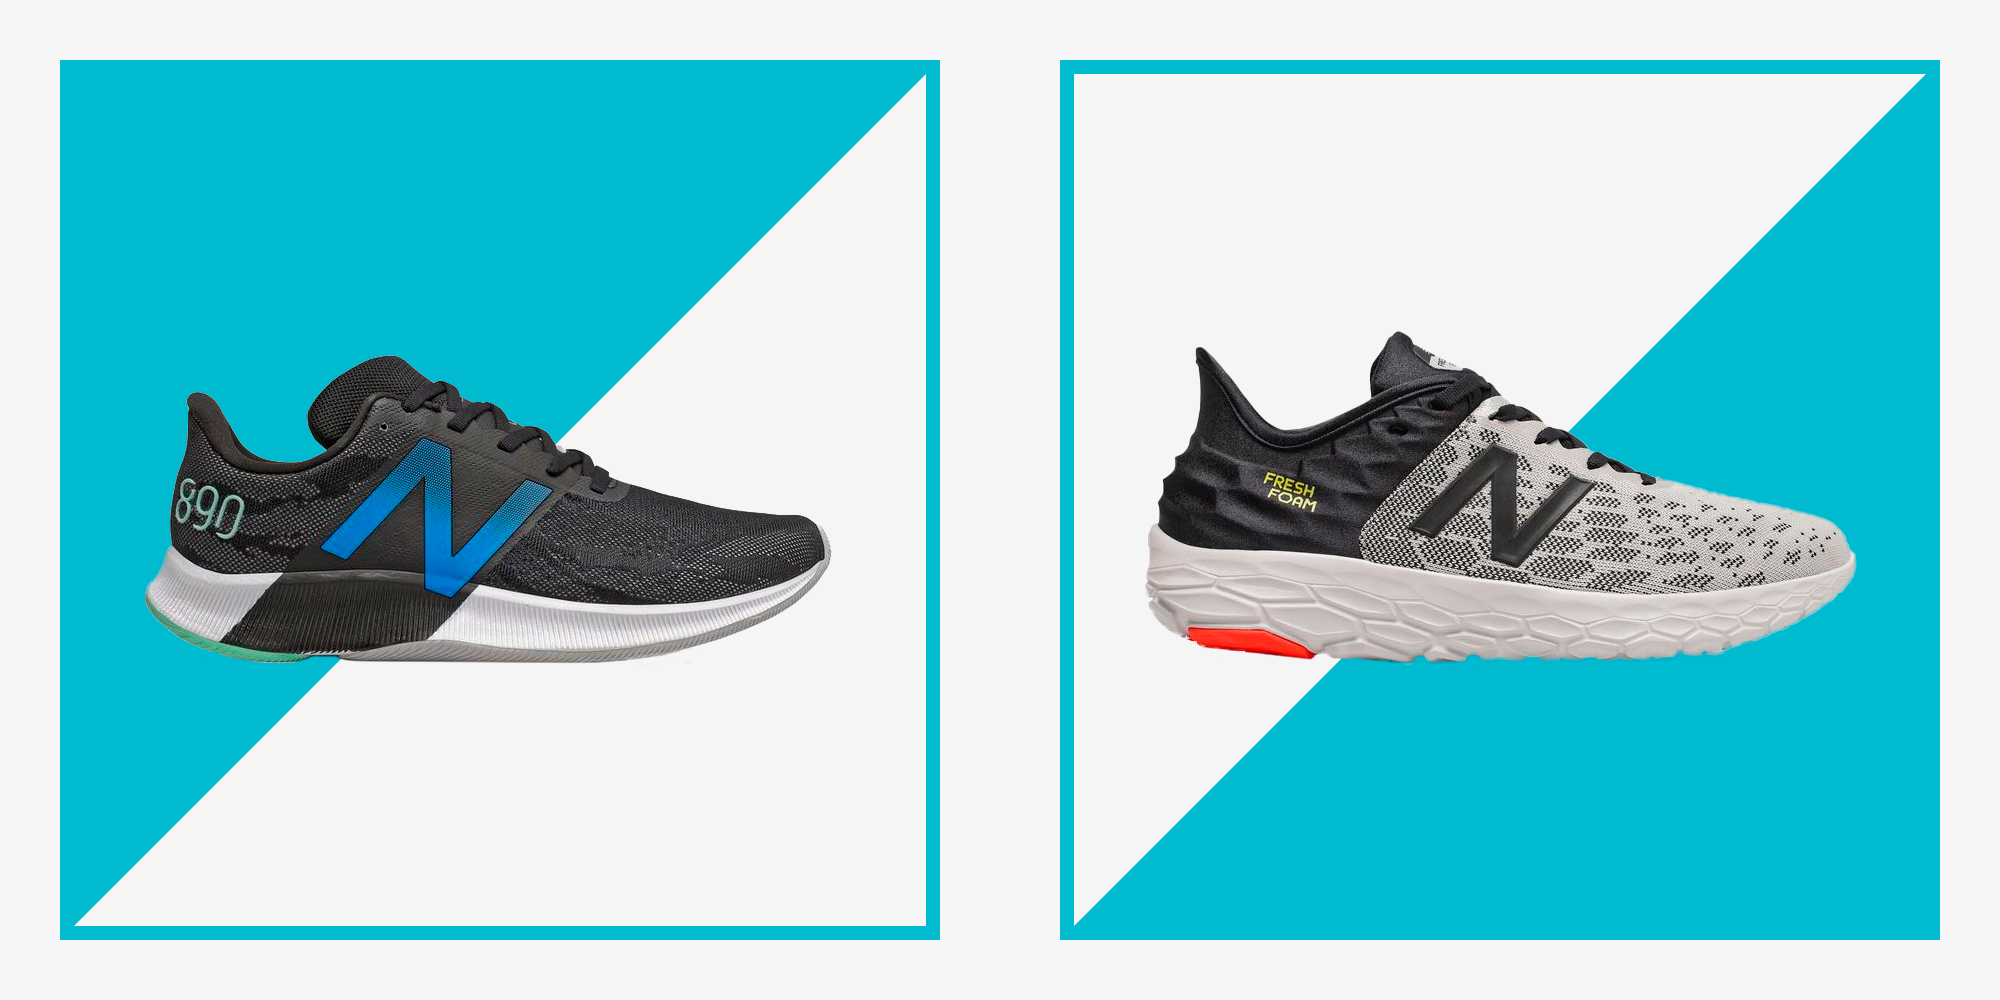 New Balance Is Having a Really Good Sale on Running Sneakers Today